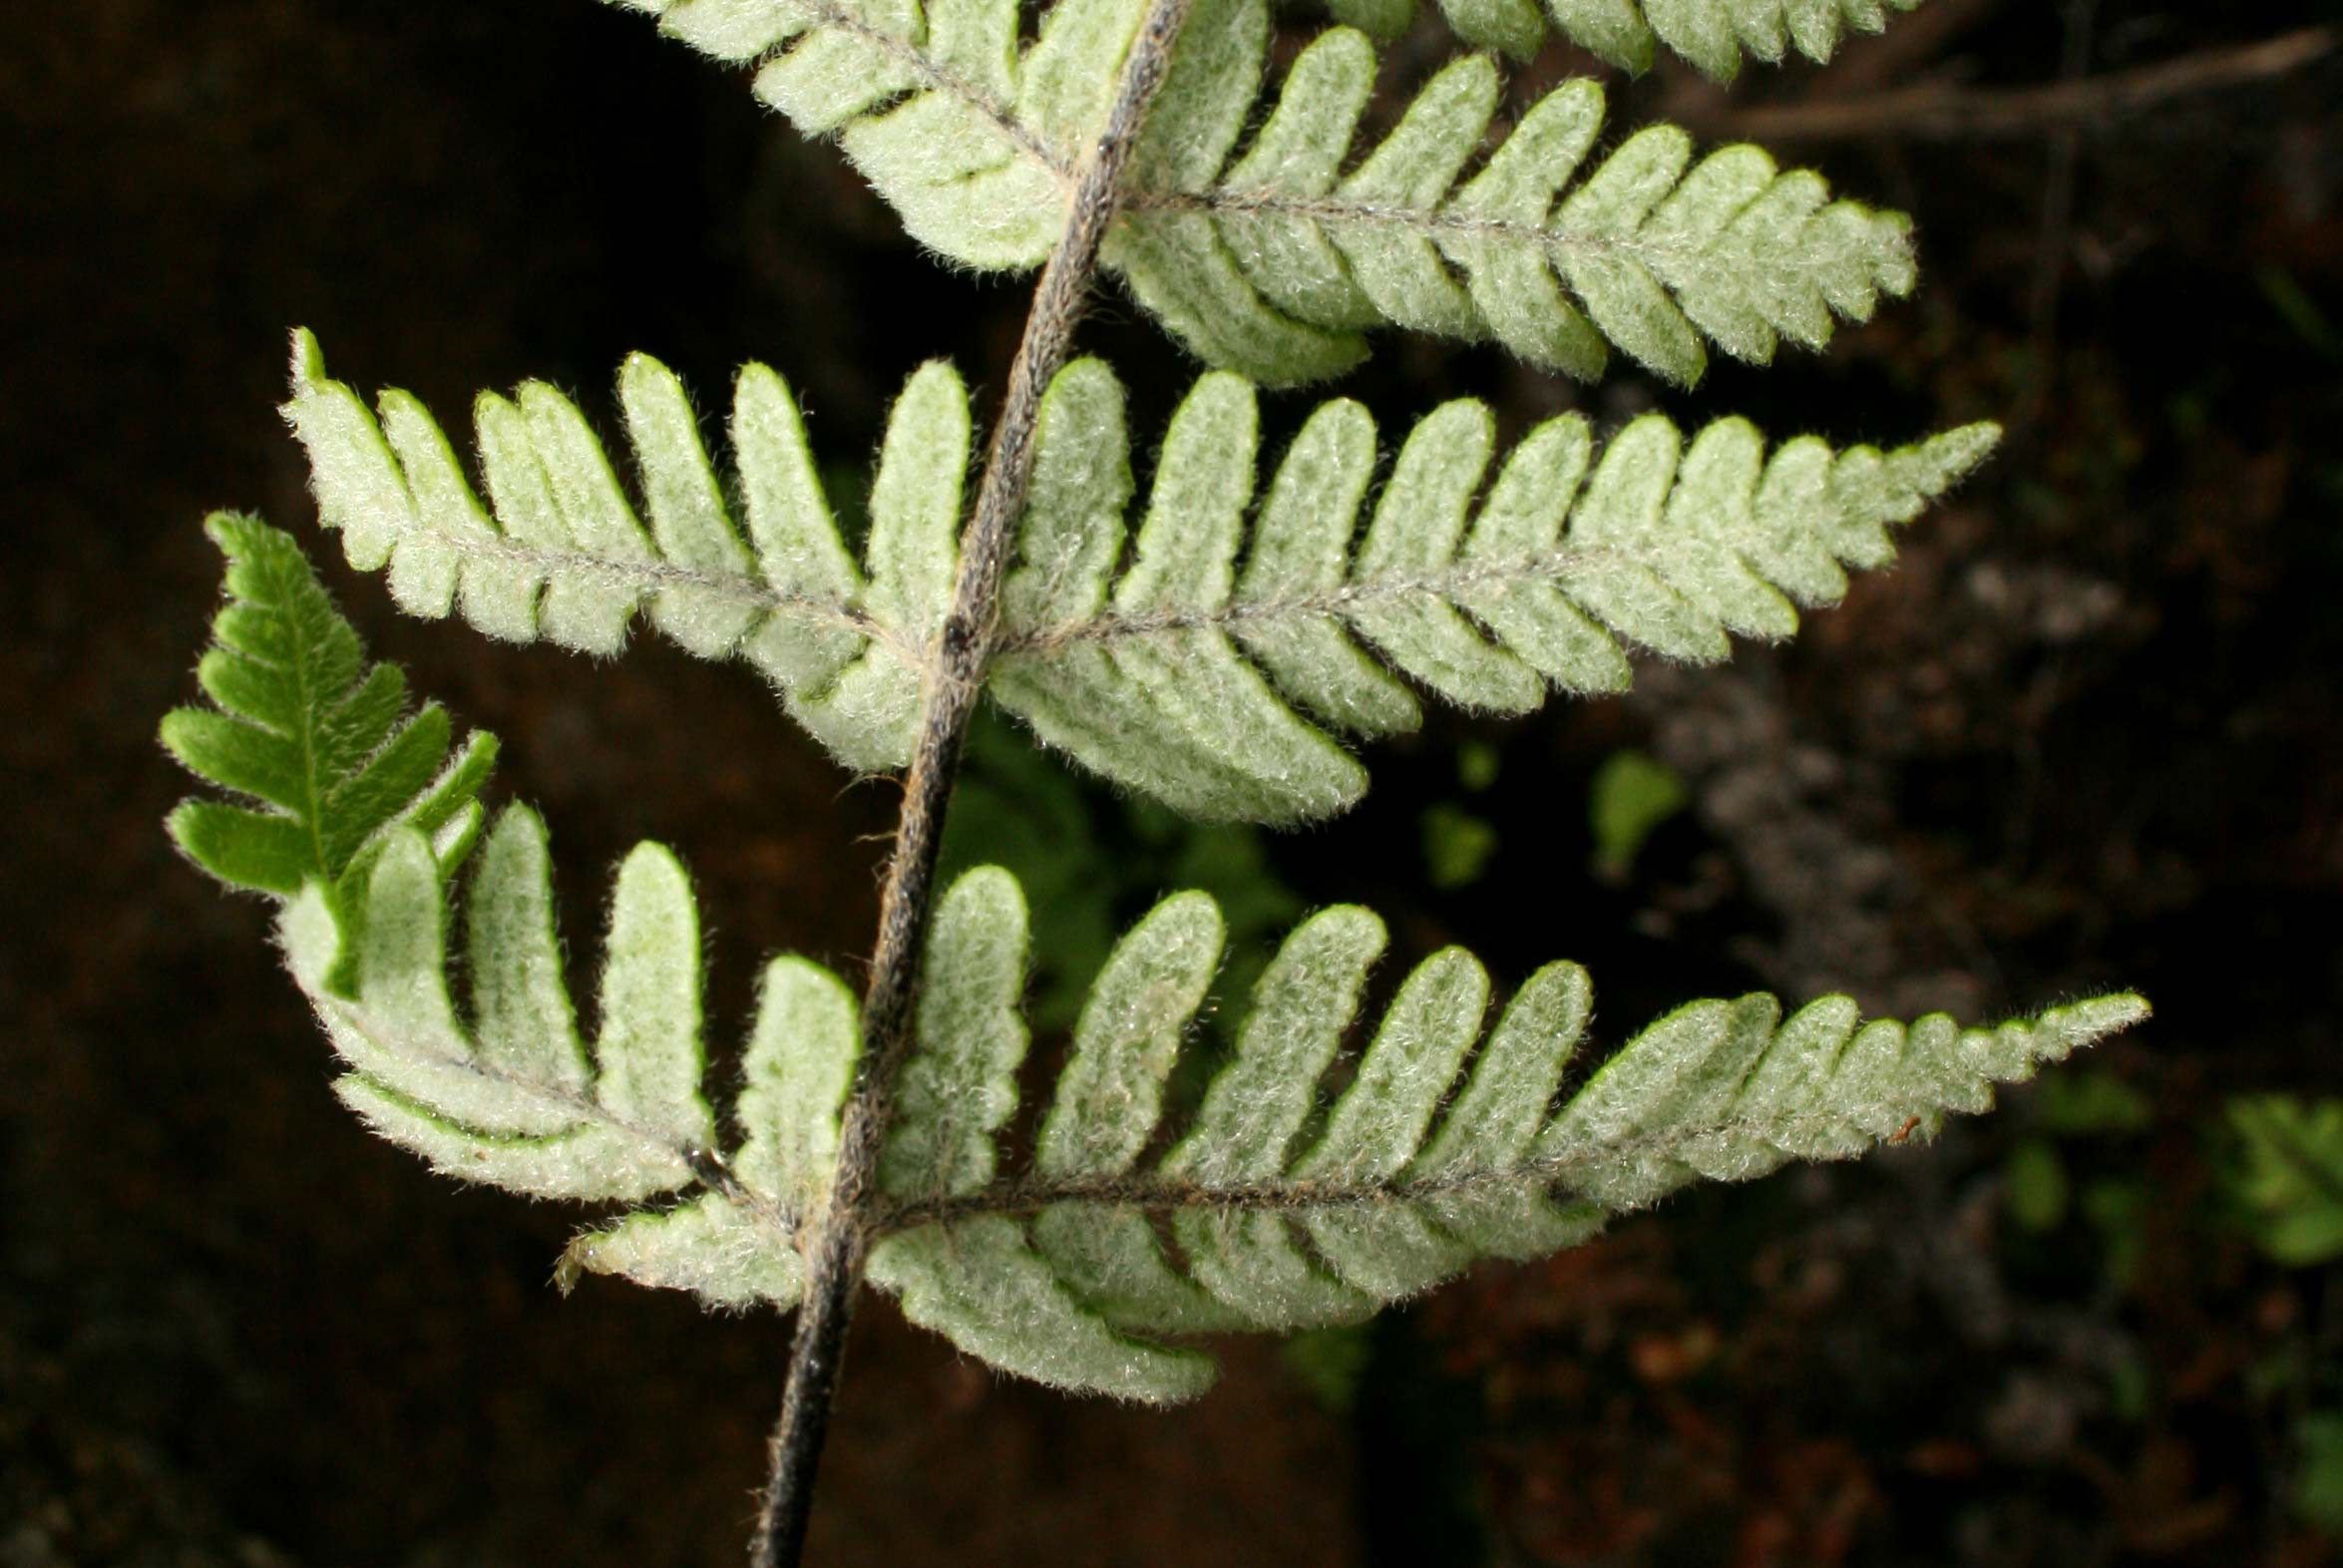 Cheilanthes inaequalis